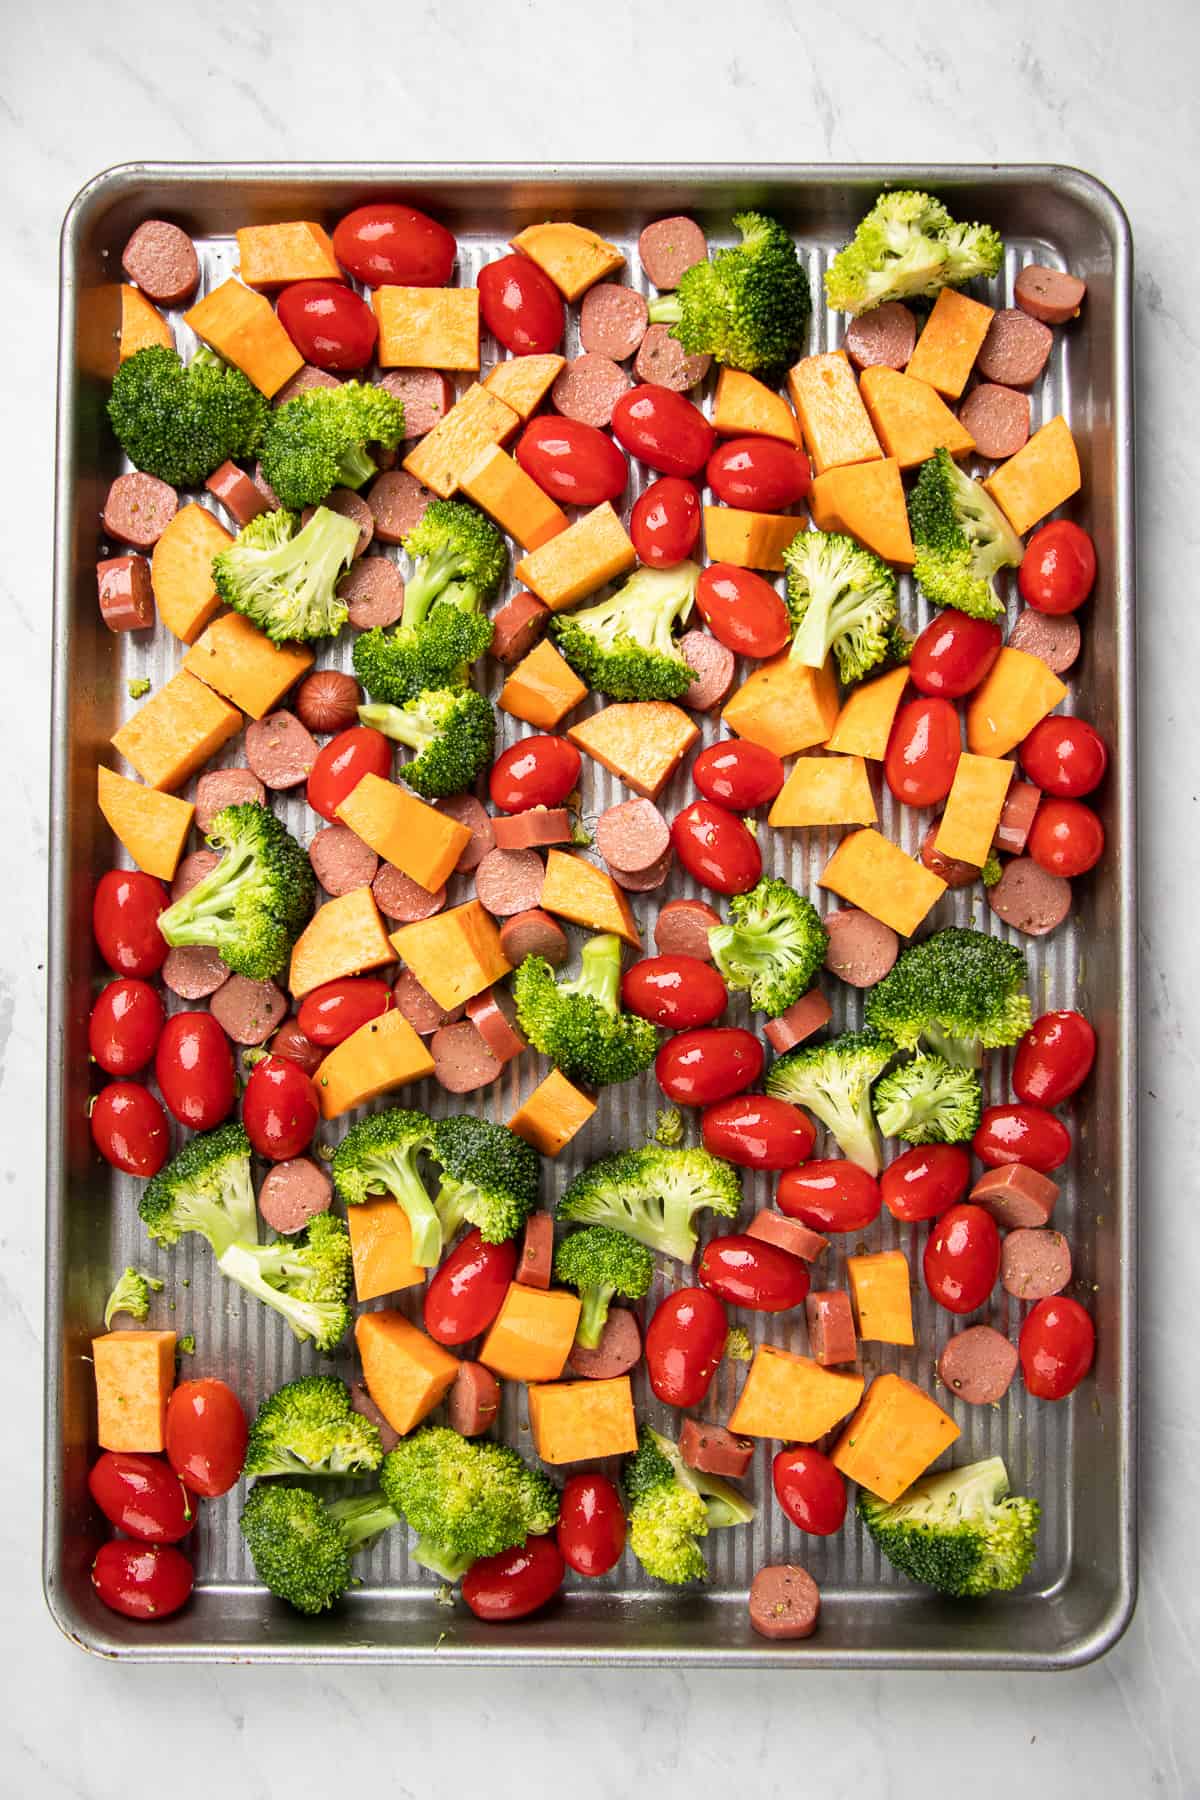 Chopped vegetables with sausage on a sheet pan.